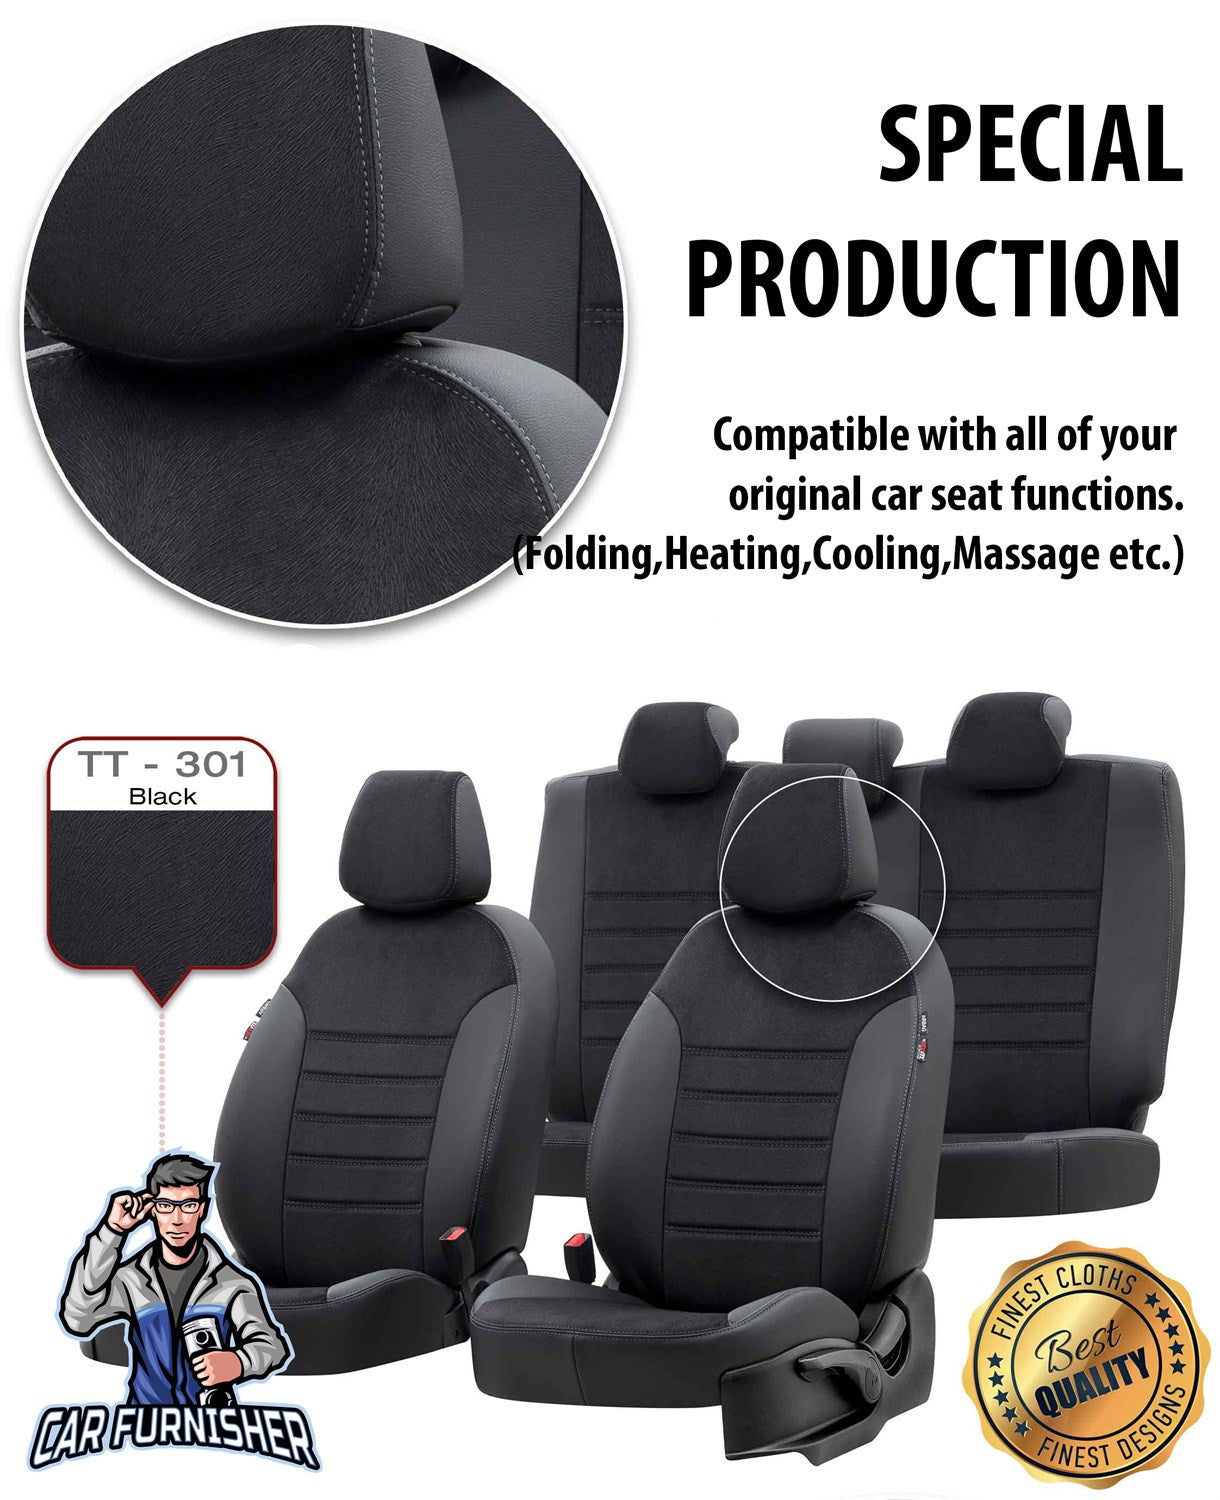 Isuzu Nlr Seat Covers London Foal Feather Design Black Leather & Foal Feather